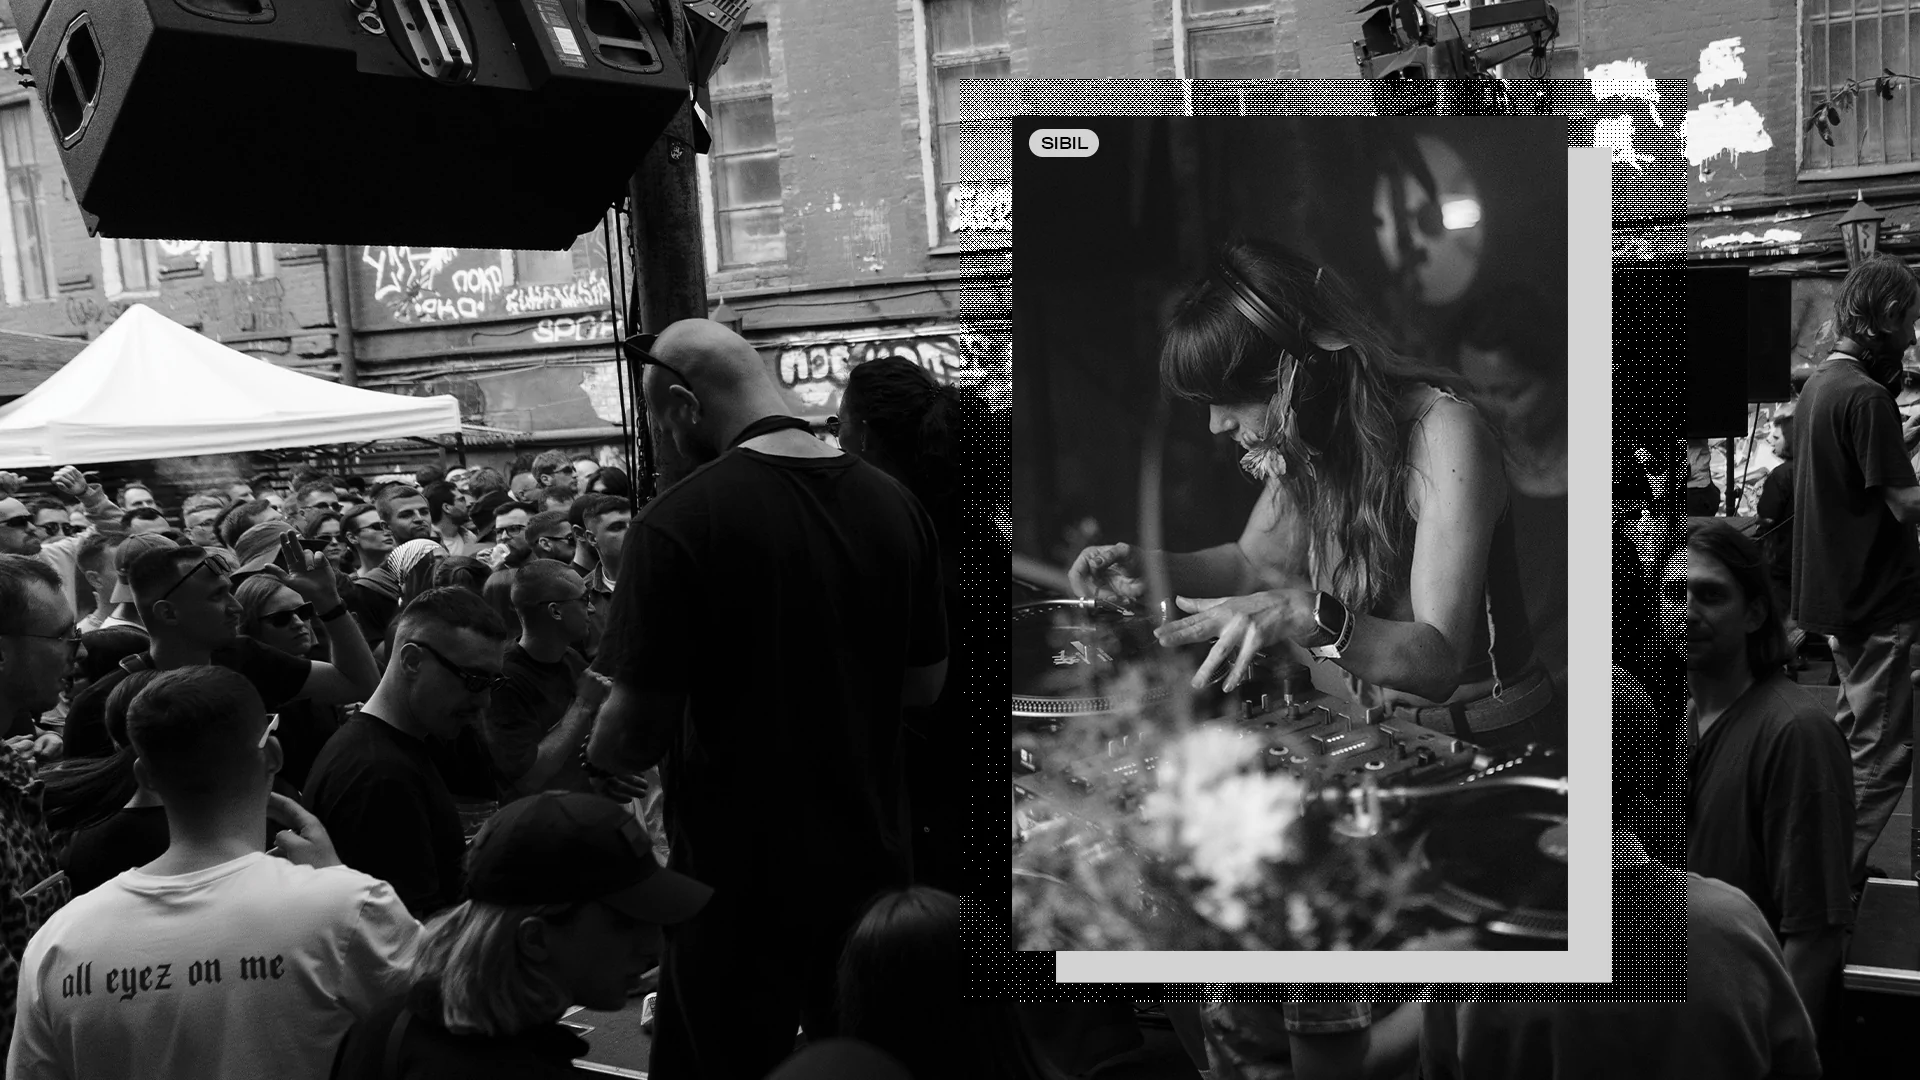 Black and white collage of Sibil DJing and the crowd at Strichka festival